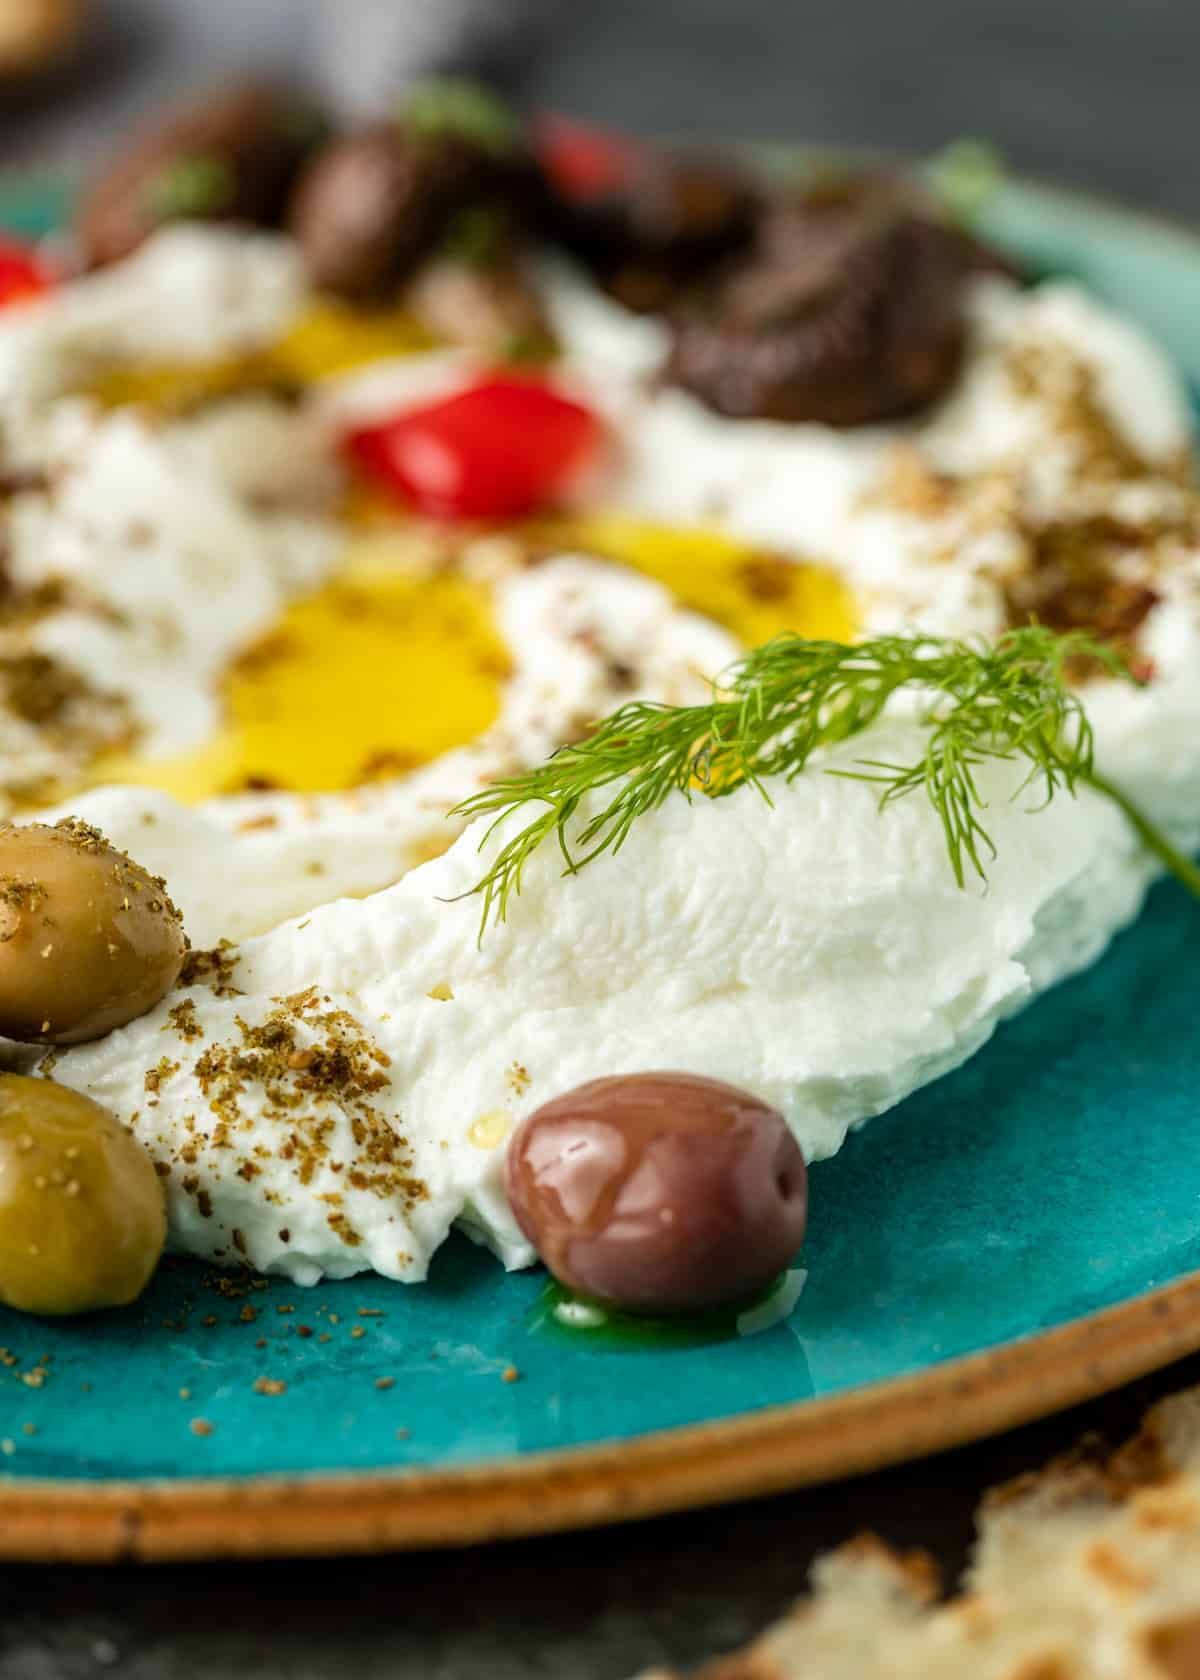 extreme close up of labneh topped with drizzle of olive oil, surrounded by green olives